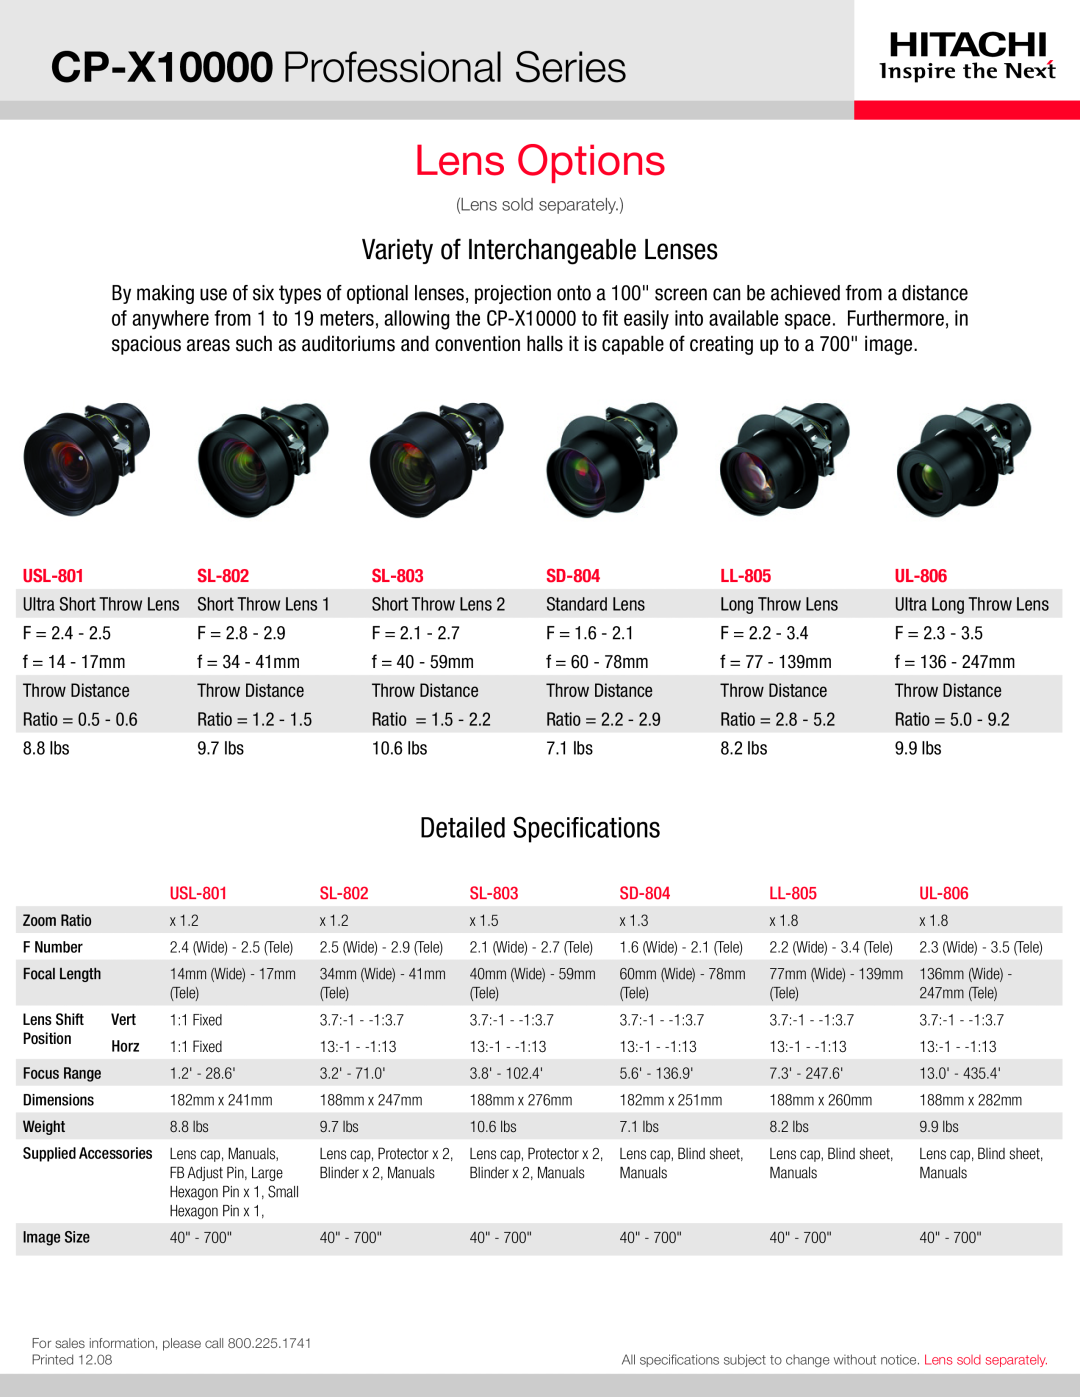 Hitachi CP-X10000 Professional Series, Lens Options, Variety of Interchangeable Lenses, Detailed Specifications, SL-802 